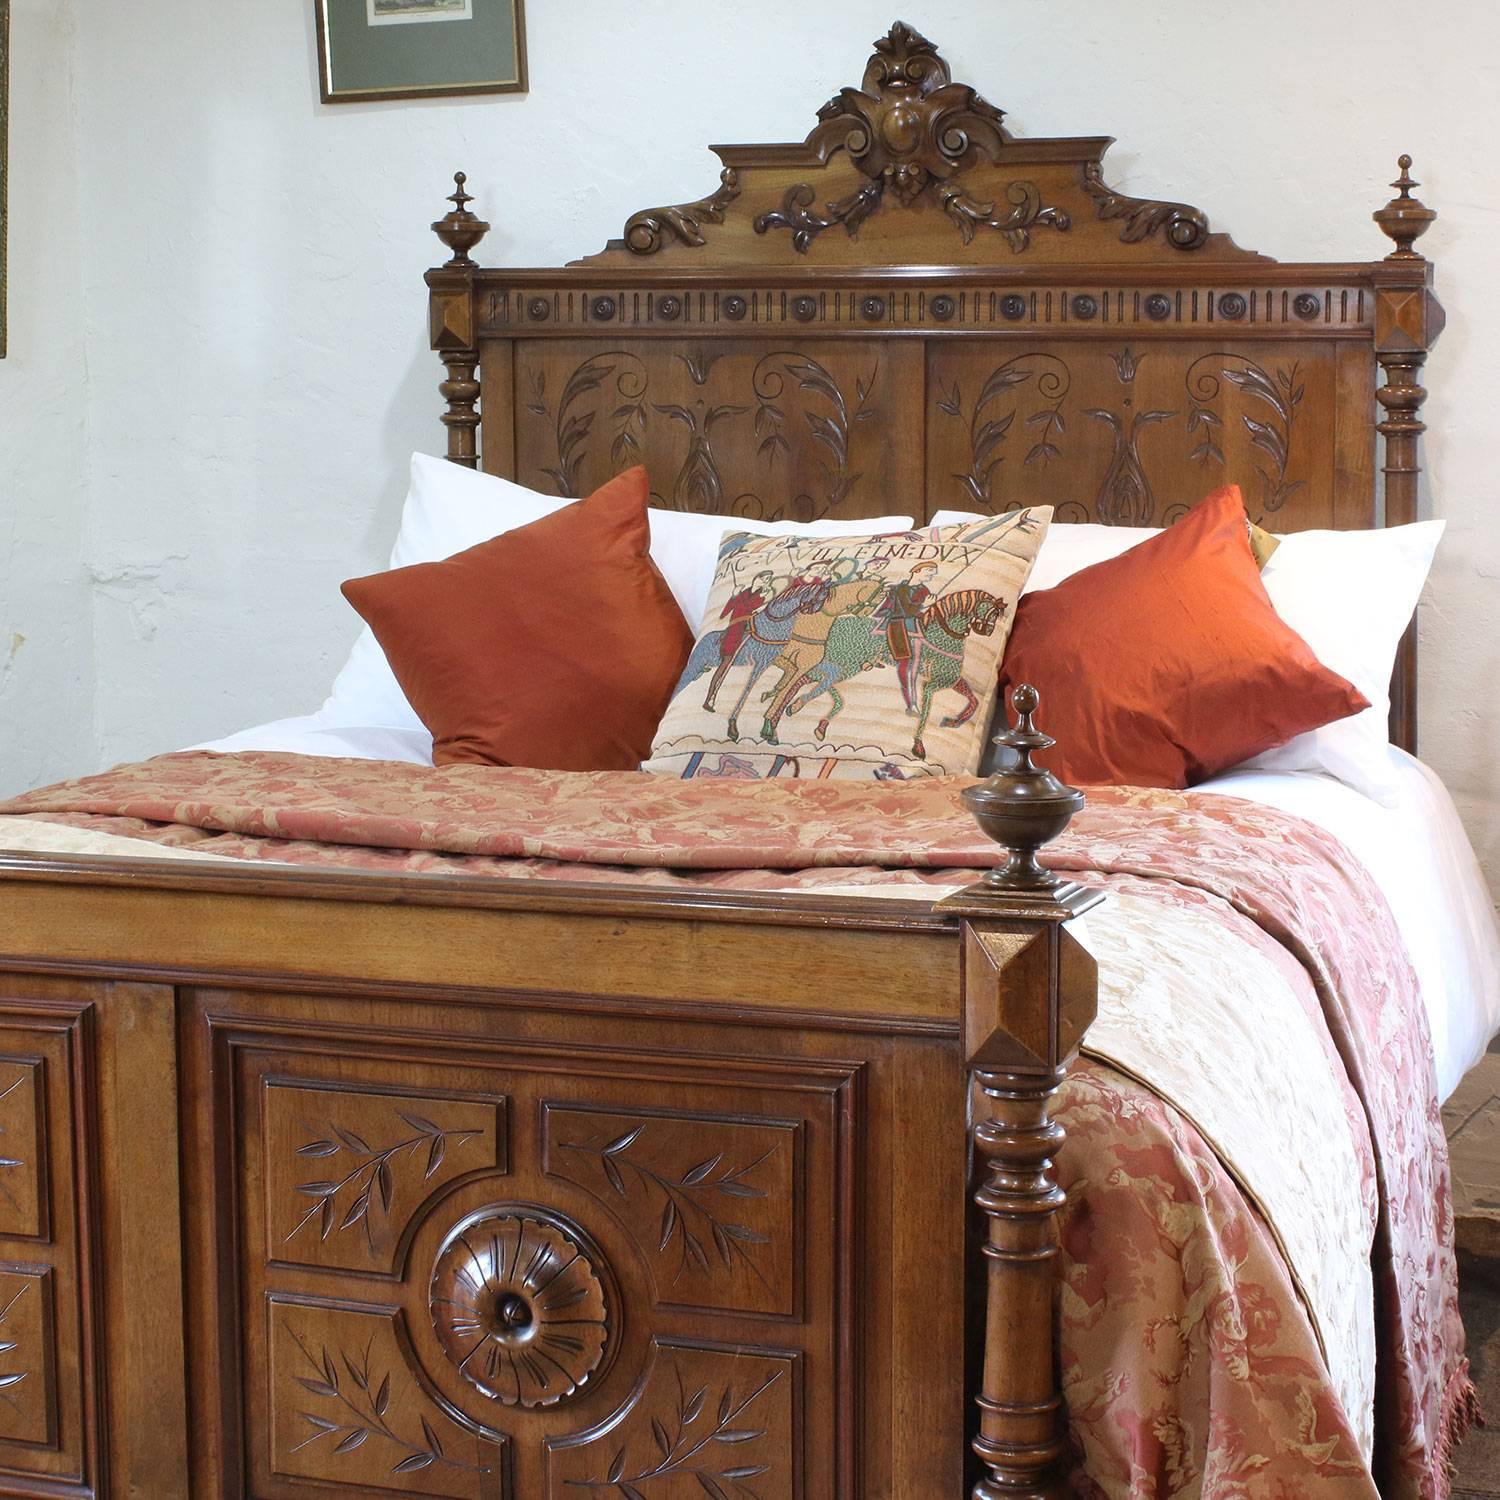 A fine carved bed with ornate head panel and foot board in walnut.

This bed accepts a British king-size or American queen-size (60 inches, 5ft or 150cm) base and mattress set.

The price is for the bed frame alone. The base, mattress, bedding and